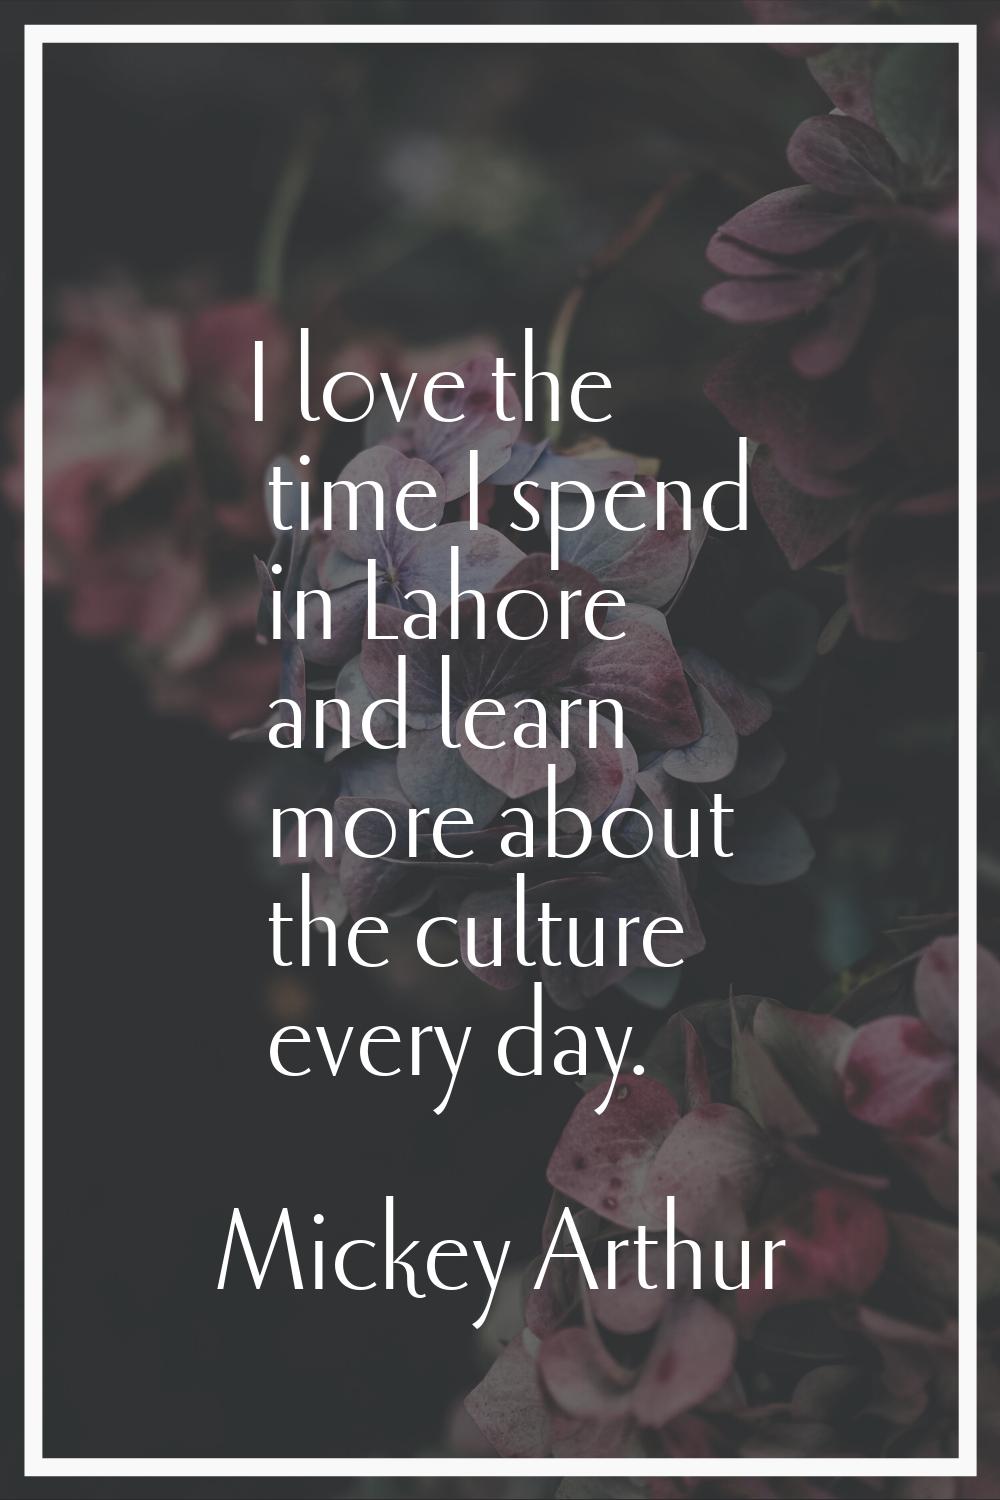 I love the time I spend in Lahore and learn more about the culture every day.